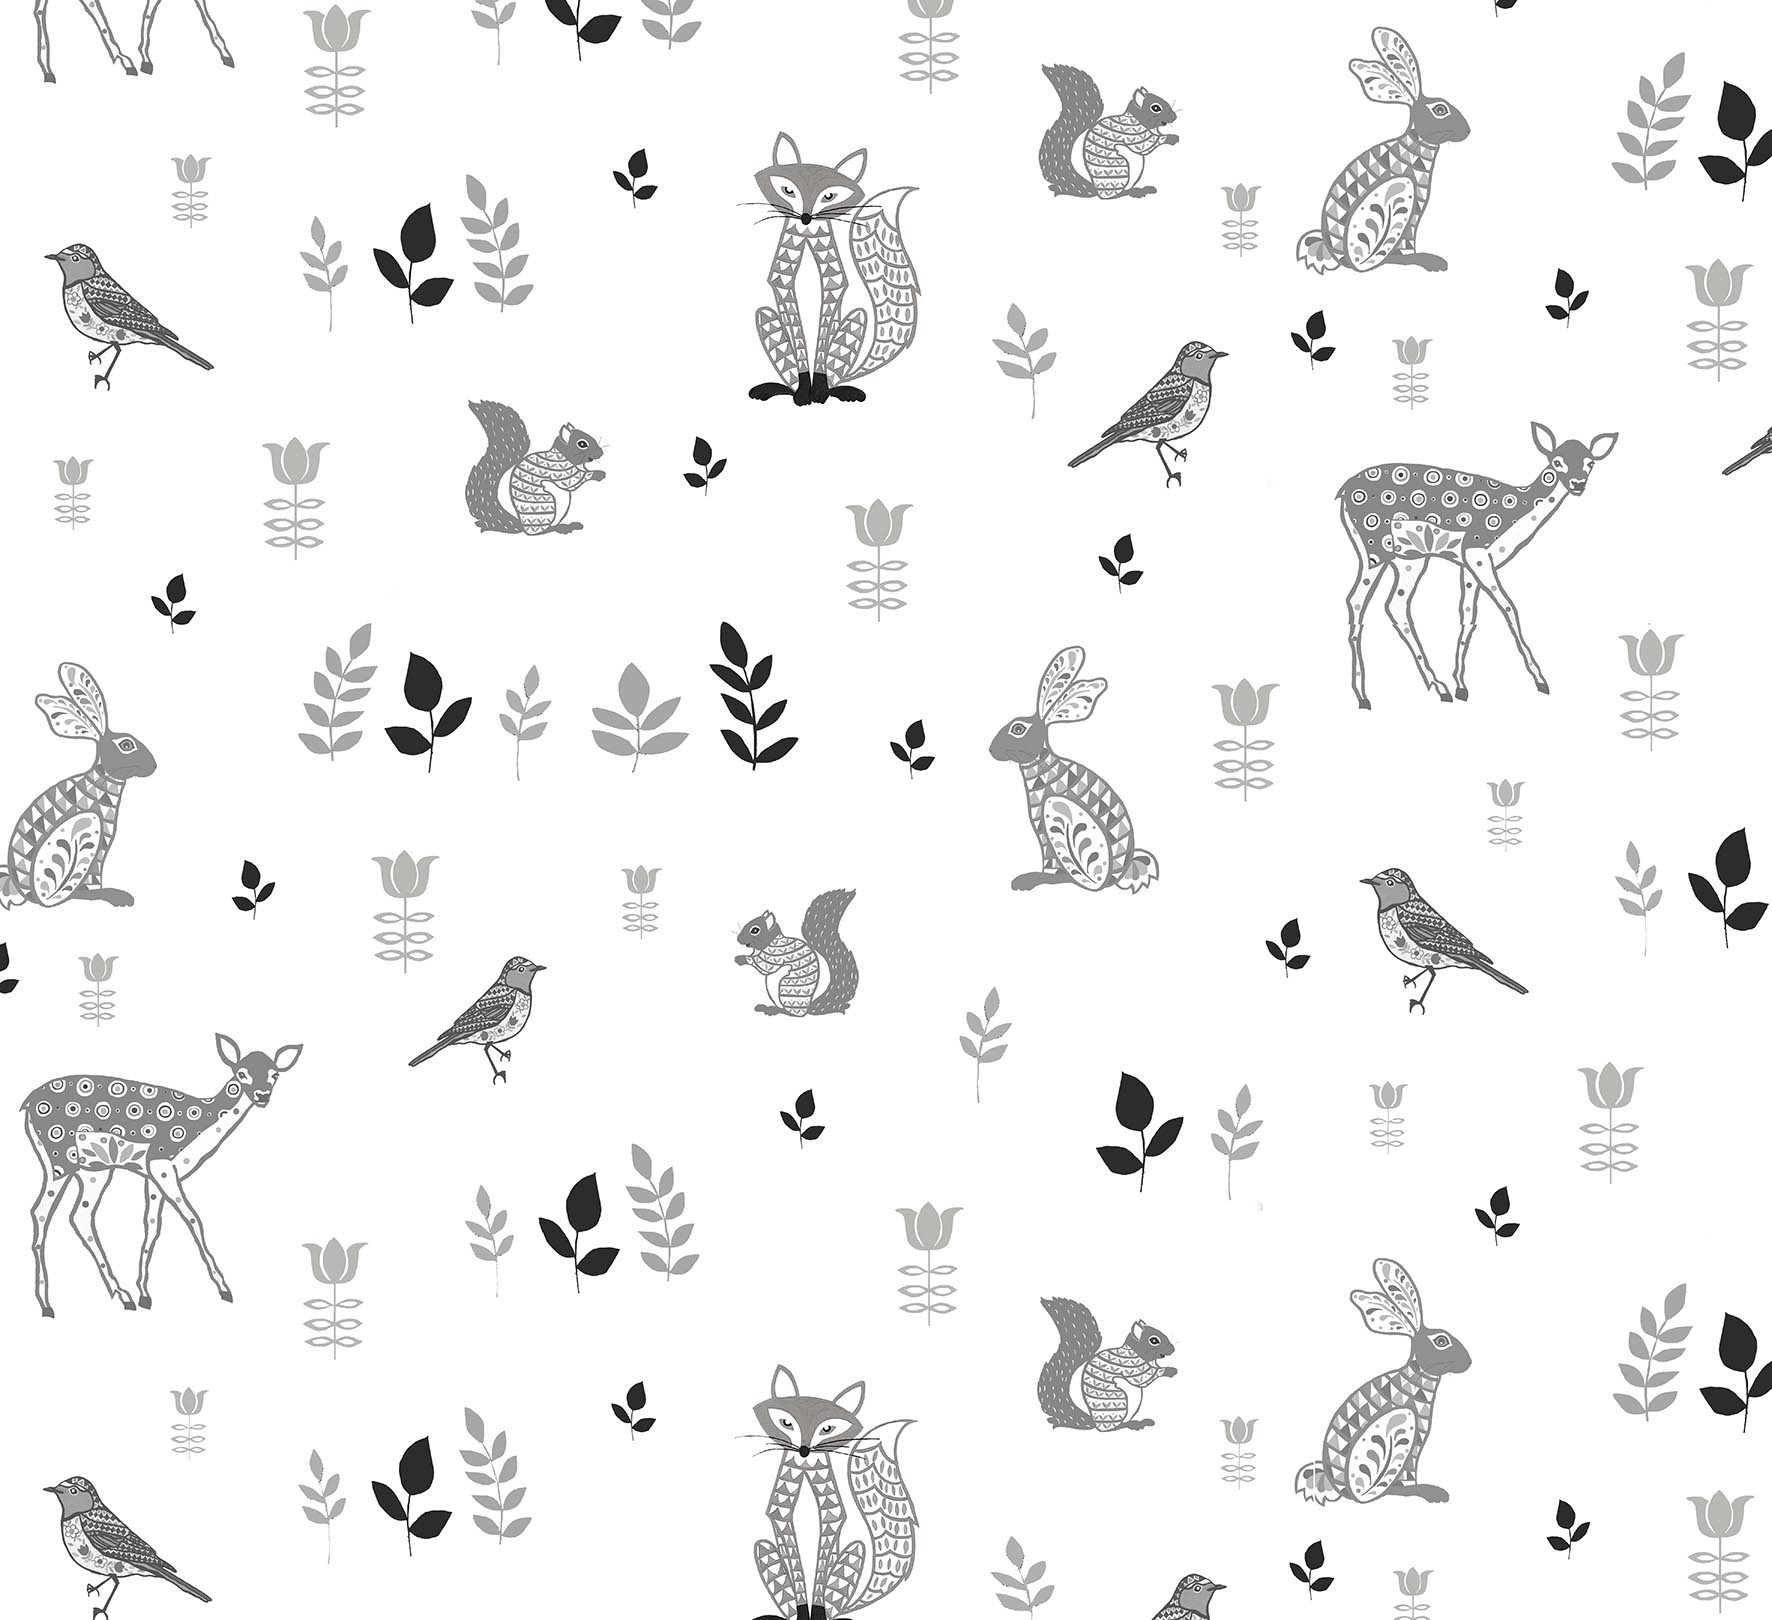 Buy Woodland Animals Childrens Wallpaper Online in India  Etsy